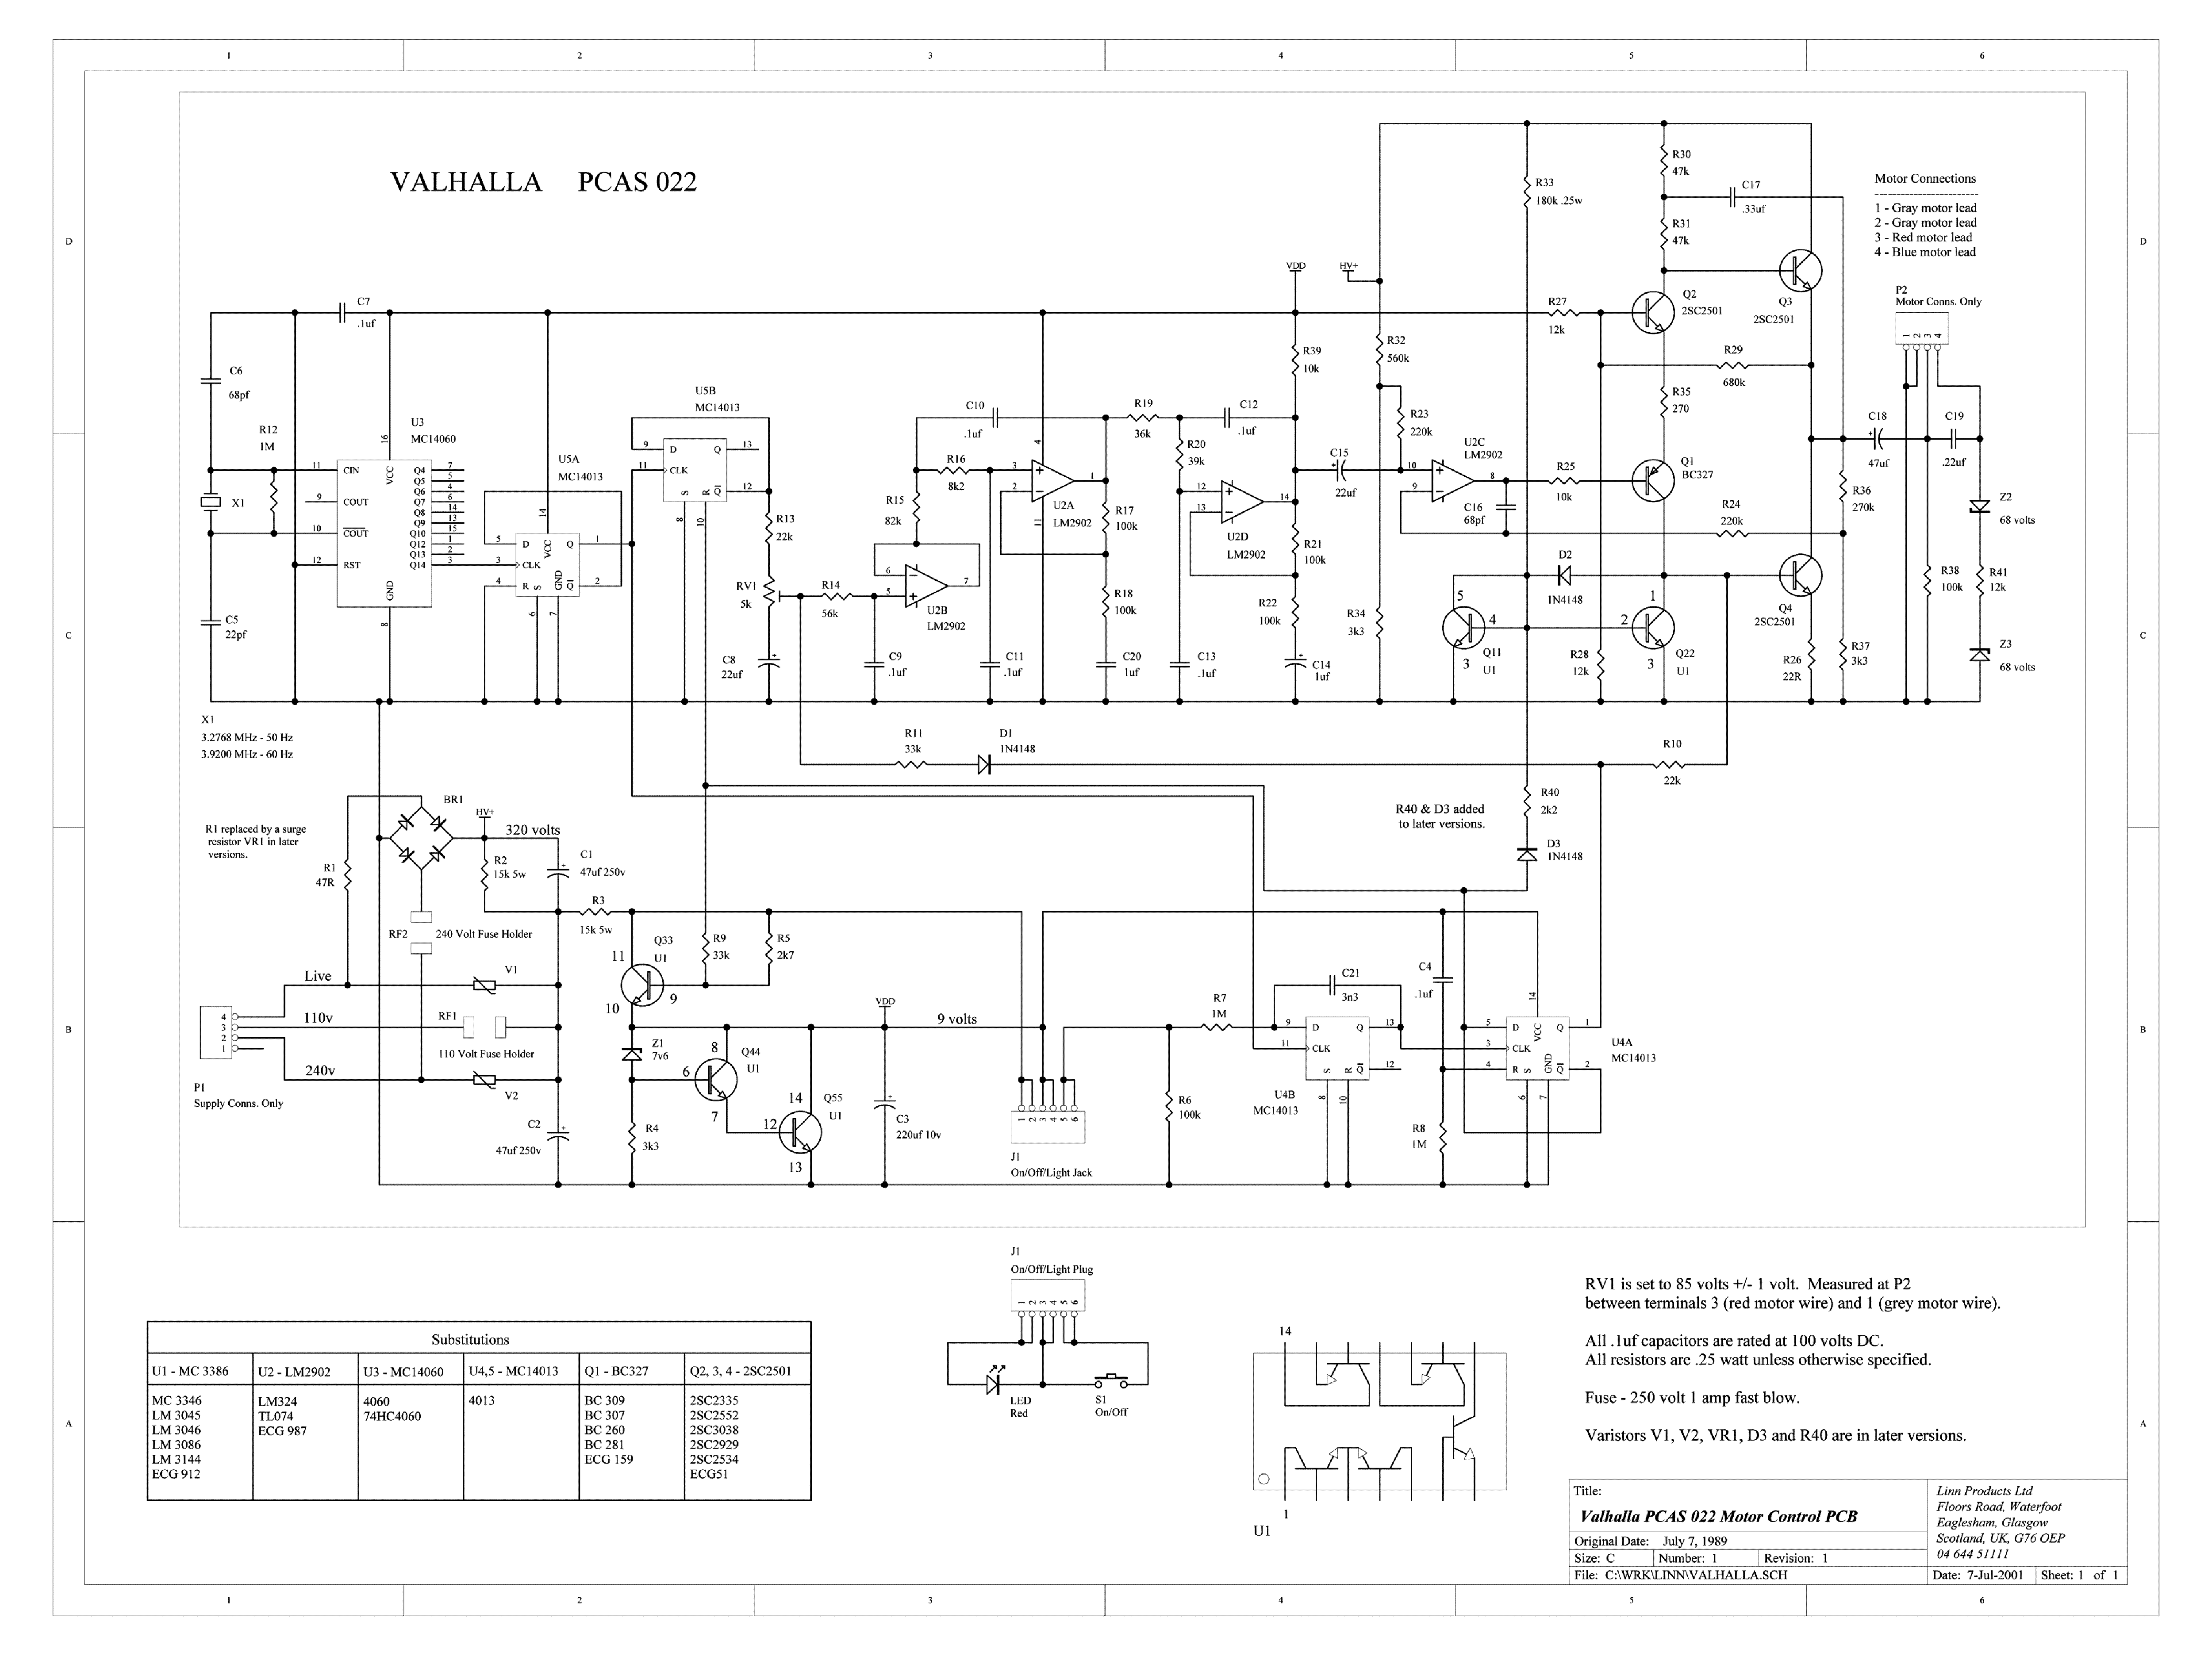 linn_valhalla_pc-as022_single_speed_33-rpm_crystal-driven_electronic_motor_control_pcb_1989_sch.pdf_1.png